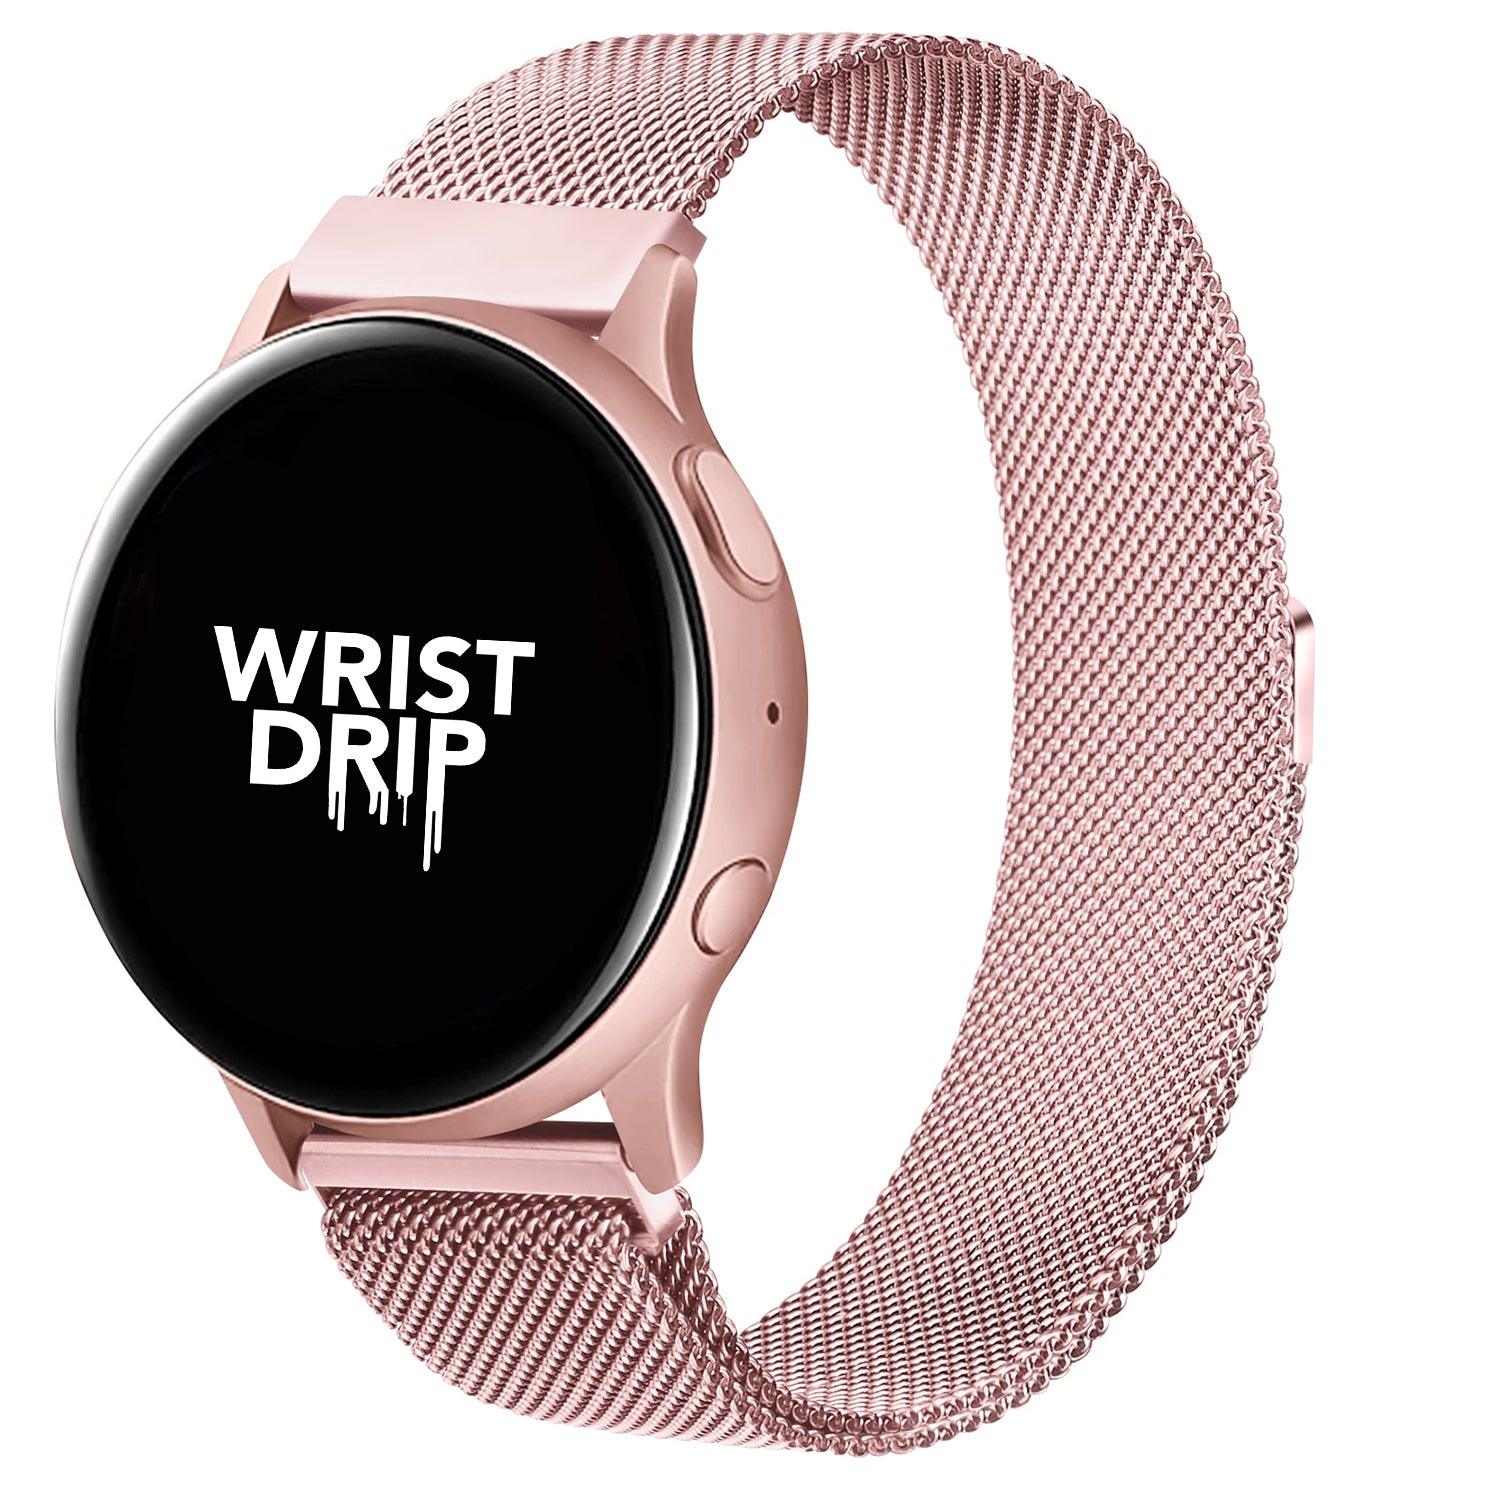 The Francois Magnetic Samsung Galaxy Watch Band (7 Colours) - shopwristdrip